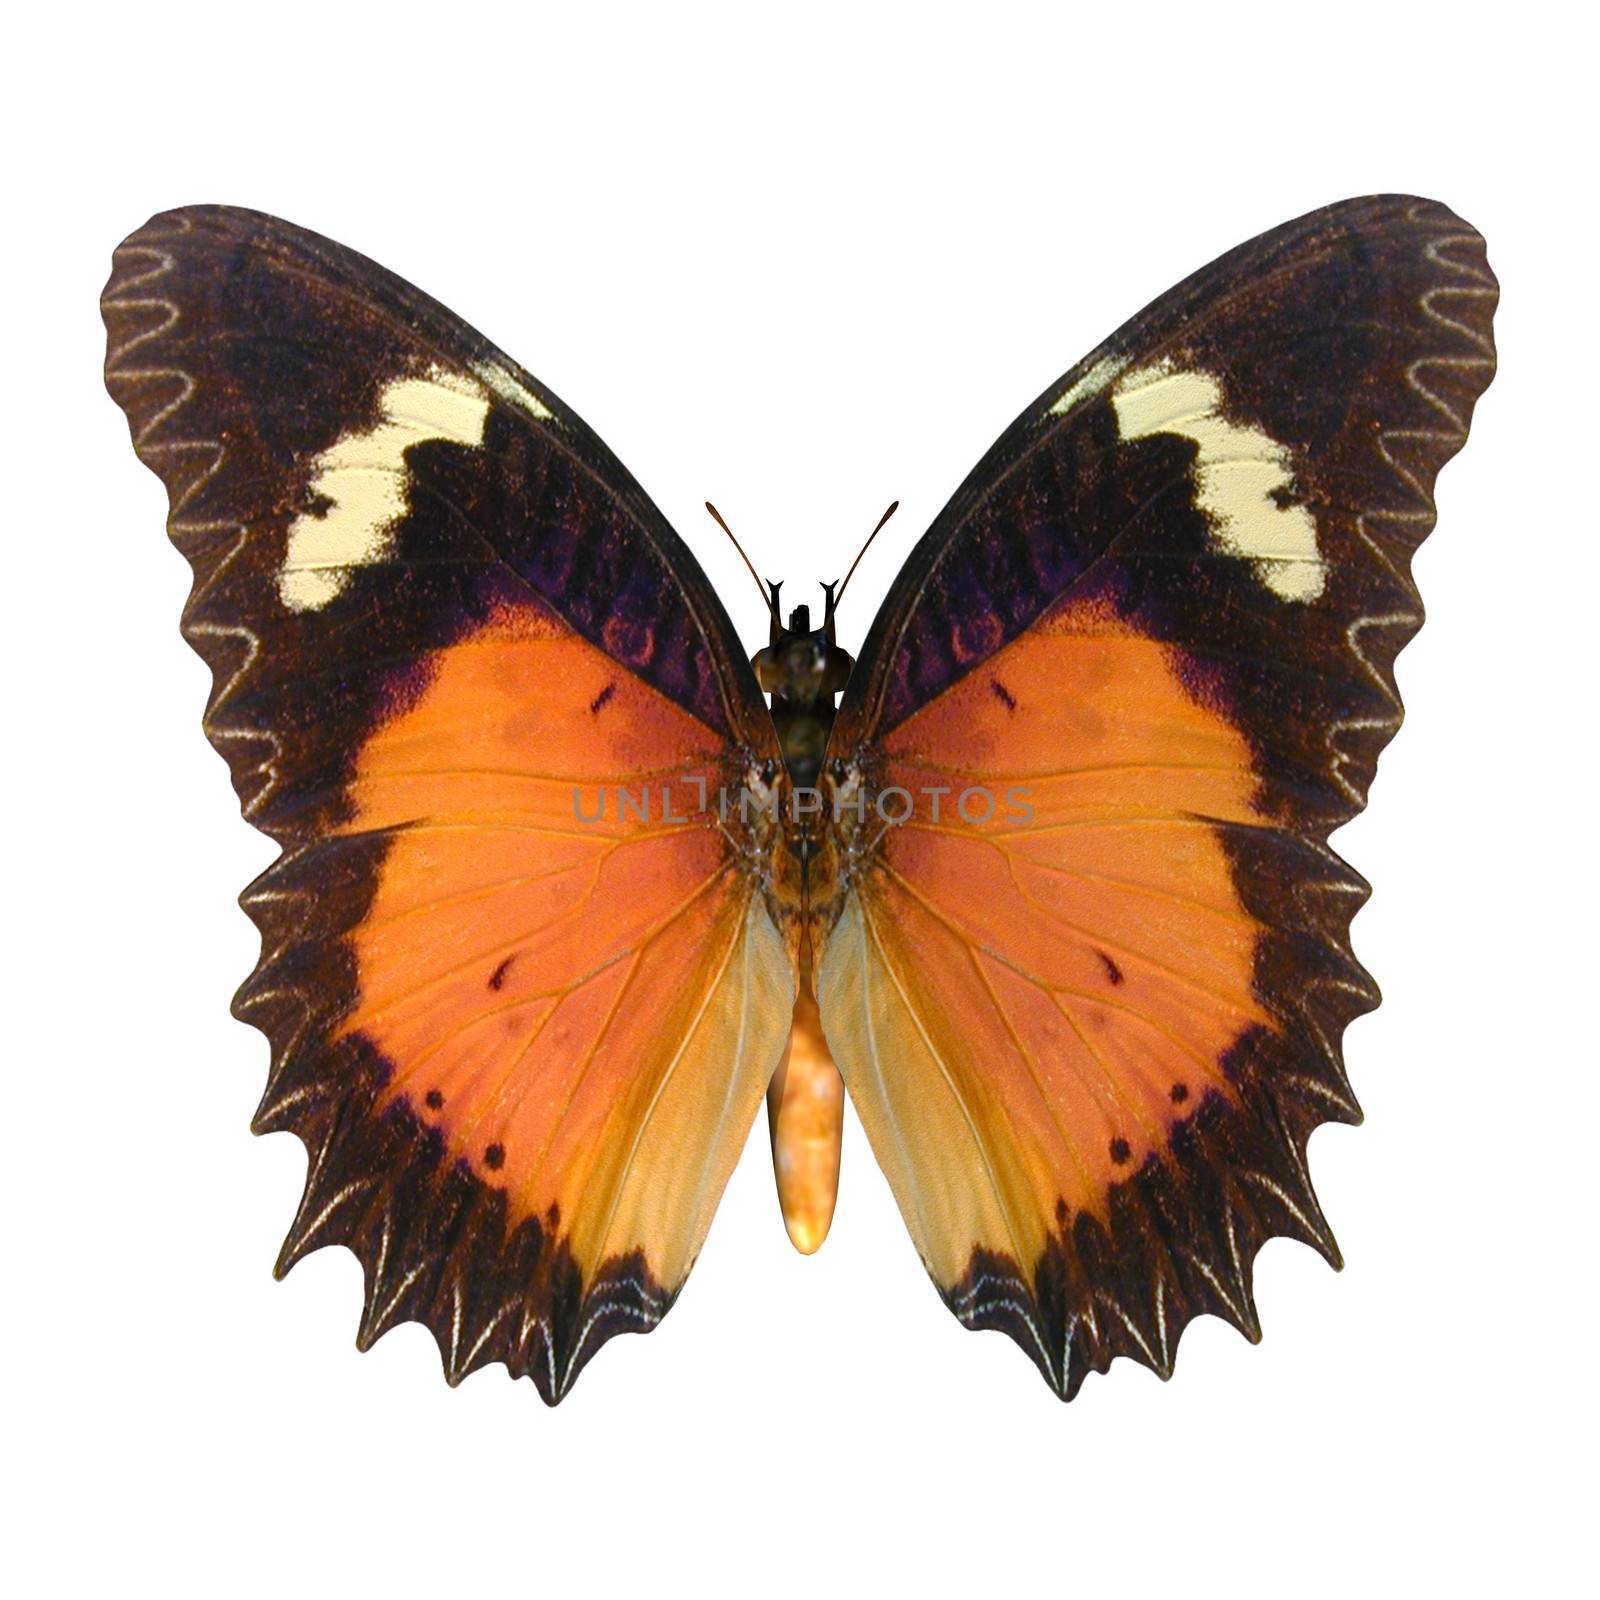 3D digital render of a male lacewing butterfly, or Leopard Lacewing (Cethosia cyane), a species of heliconiine butterfly found from India to southern China, isolated on white background